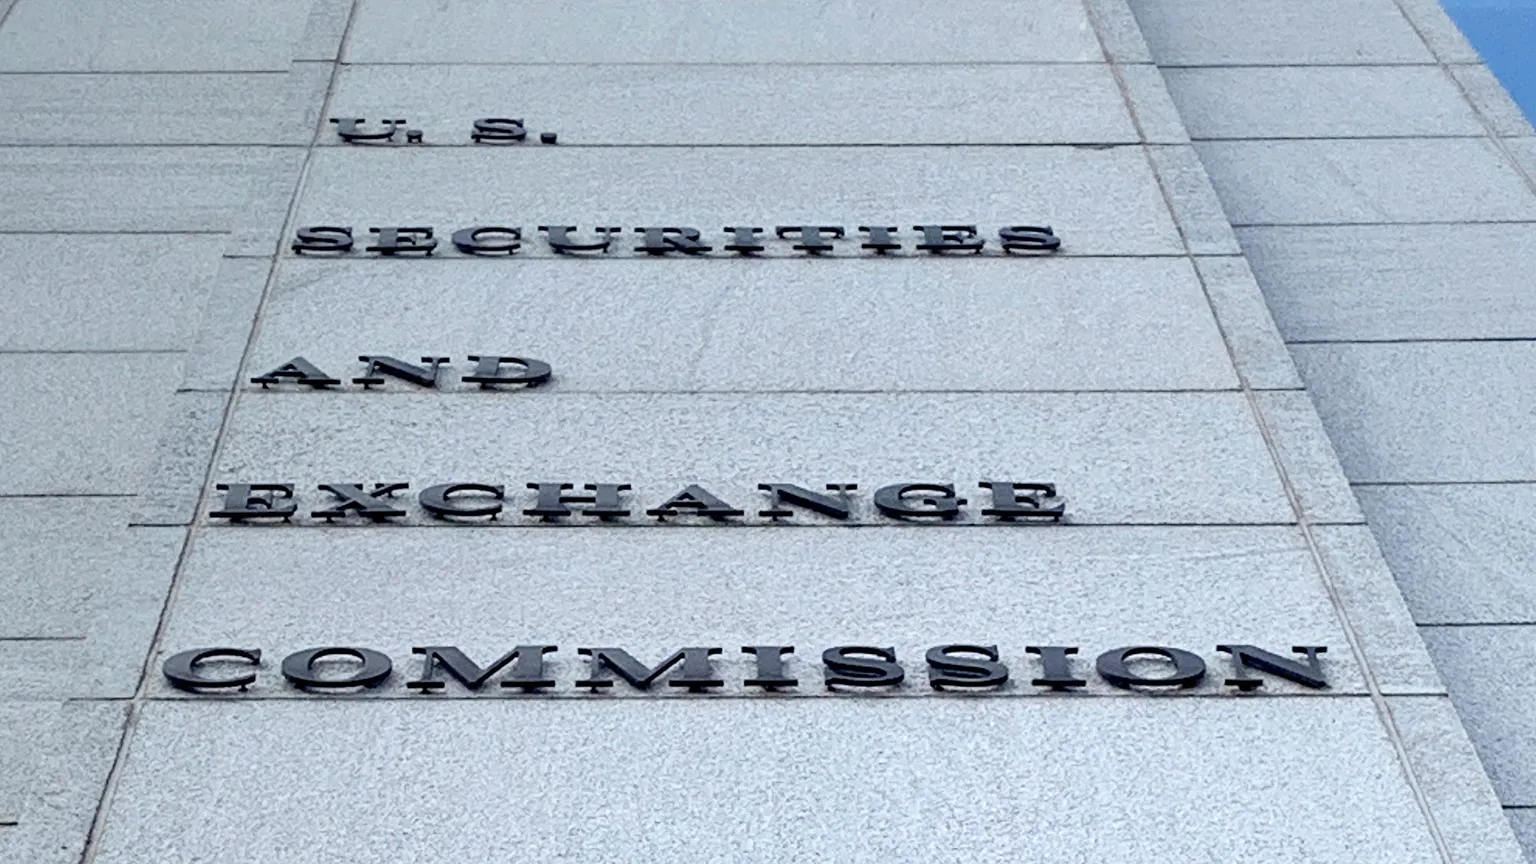 Headquarters of the Securities and Exchange Commission in Washington, D.C. Image: DCStockPhotography / Shutterstock.com